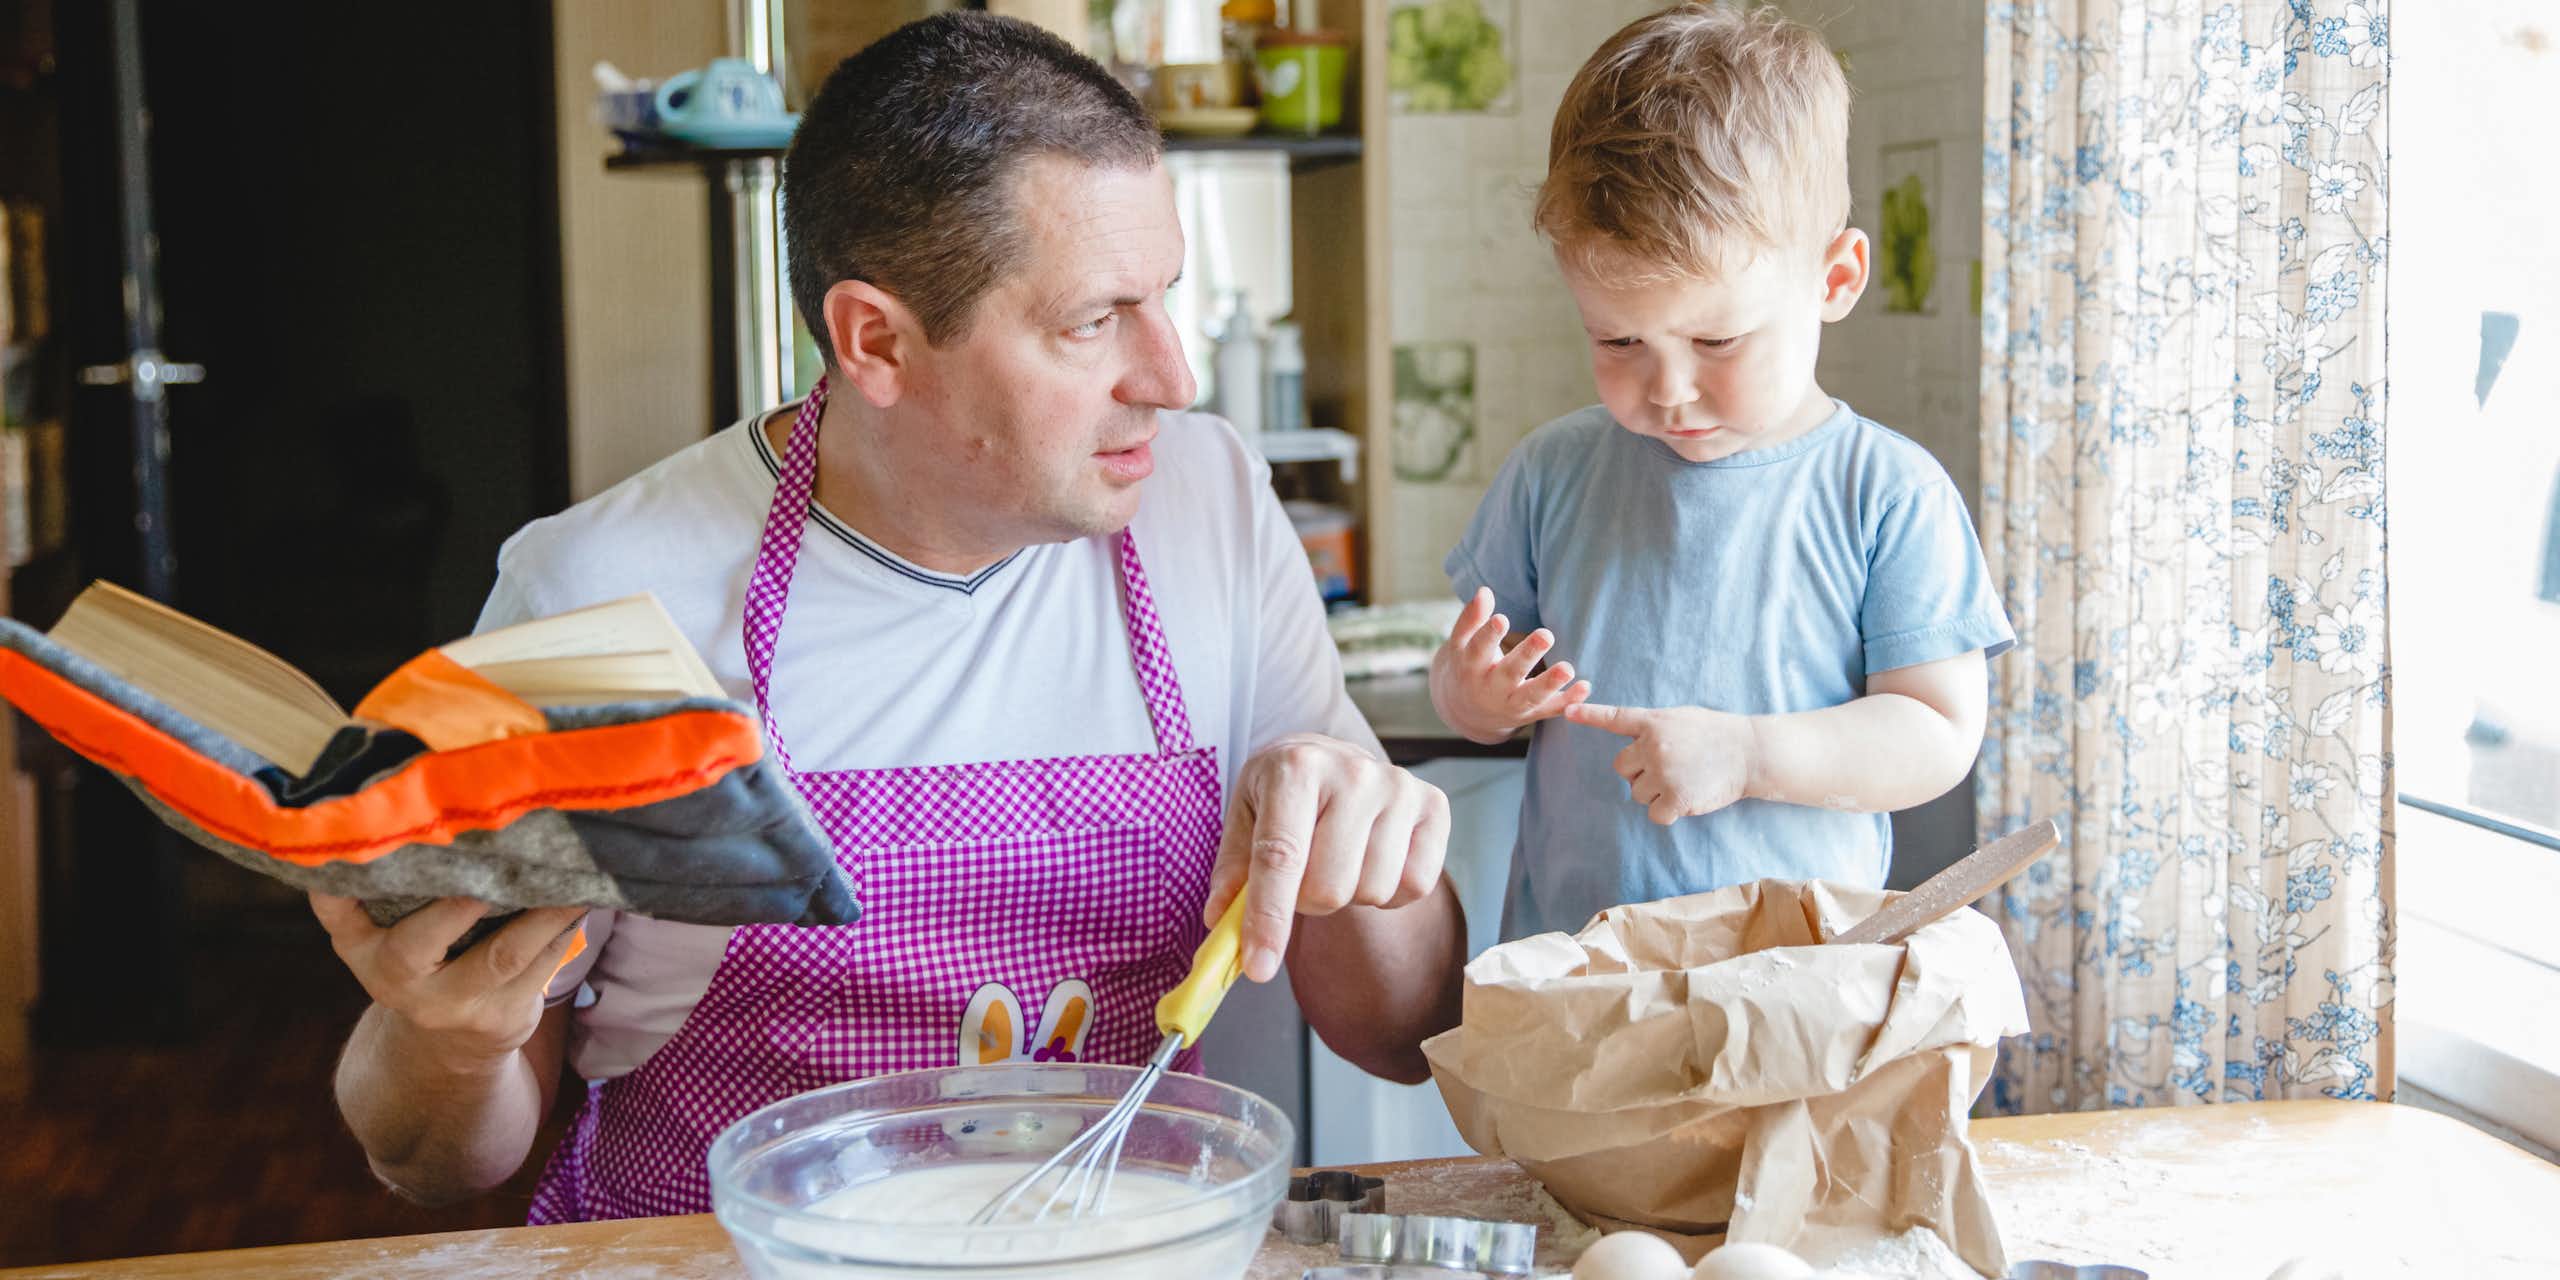 A father with a young son at the kitchen table at home preparing dough